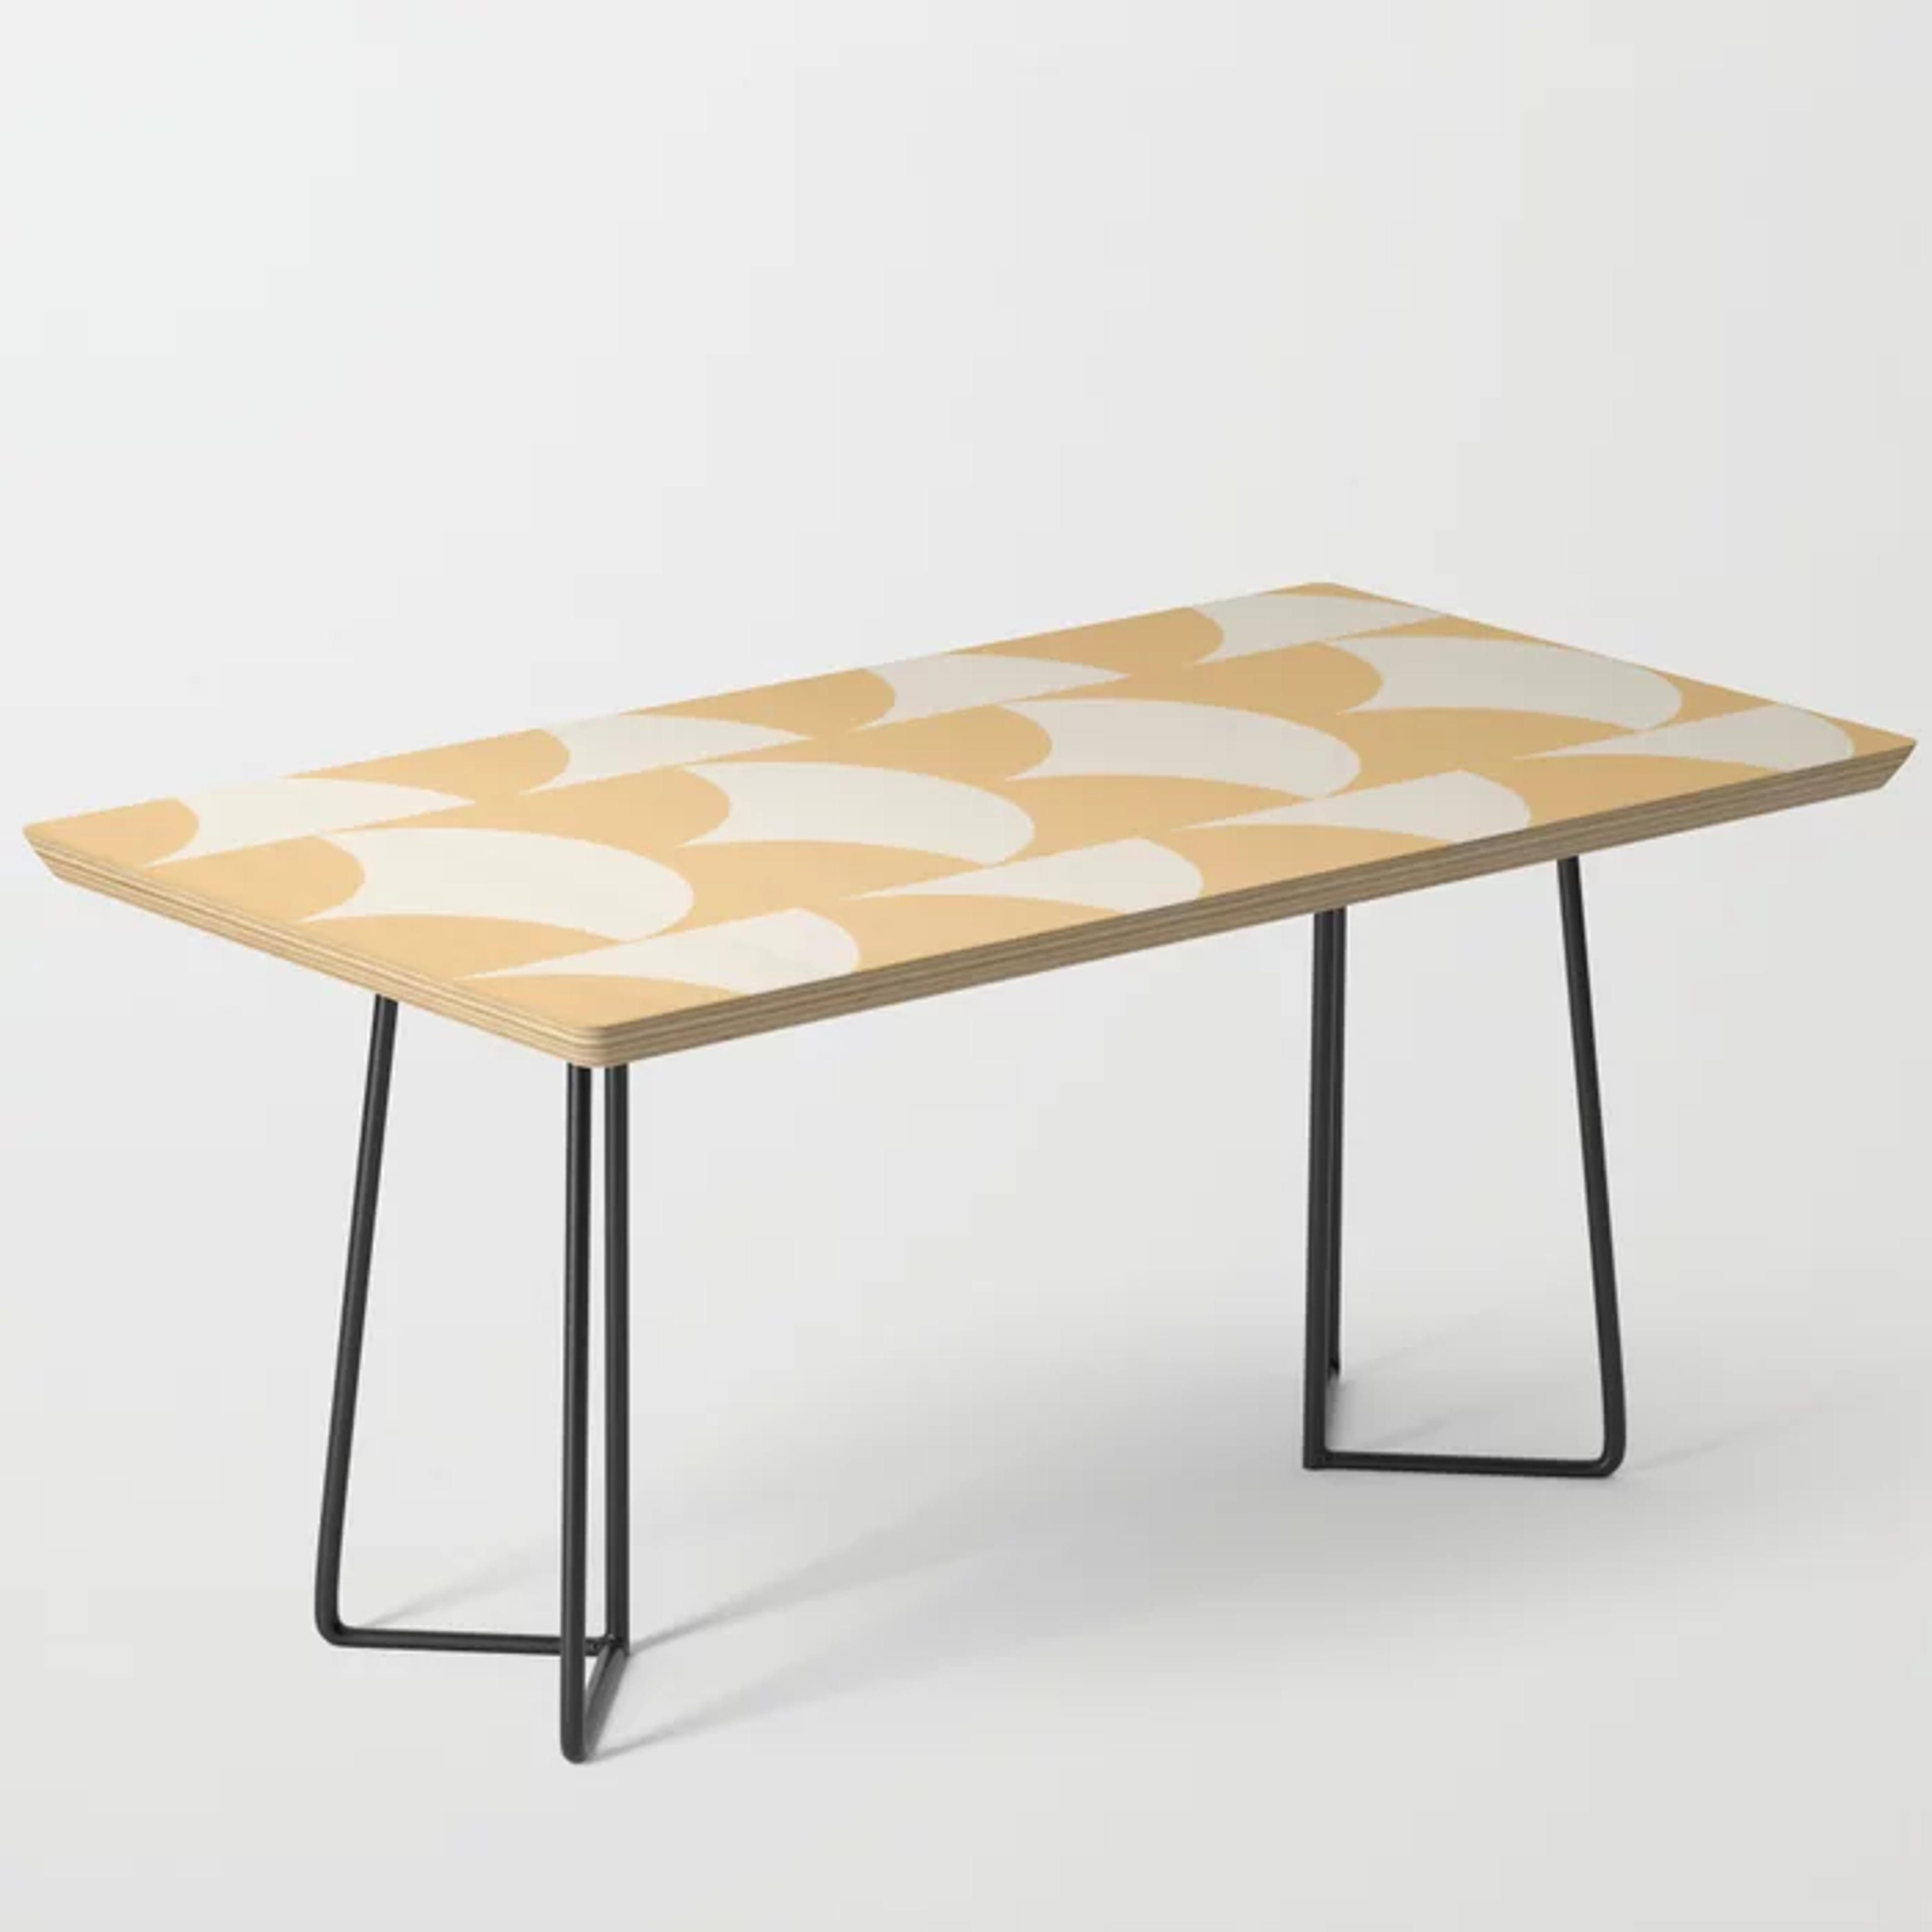 Cleo II Sunrise Coffee Table by colour poems | Society6